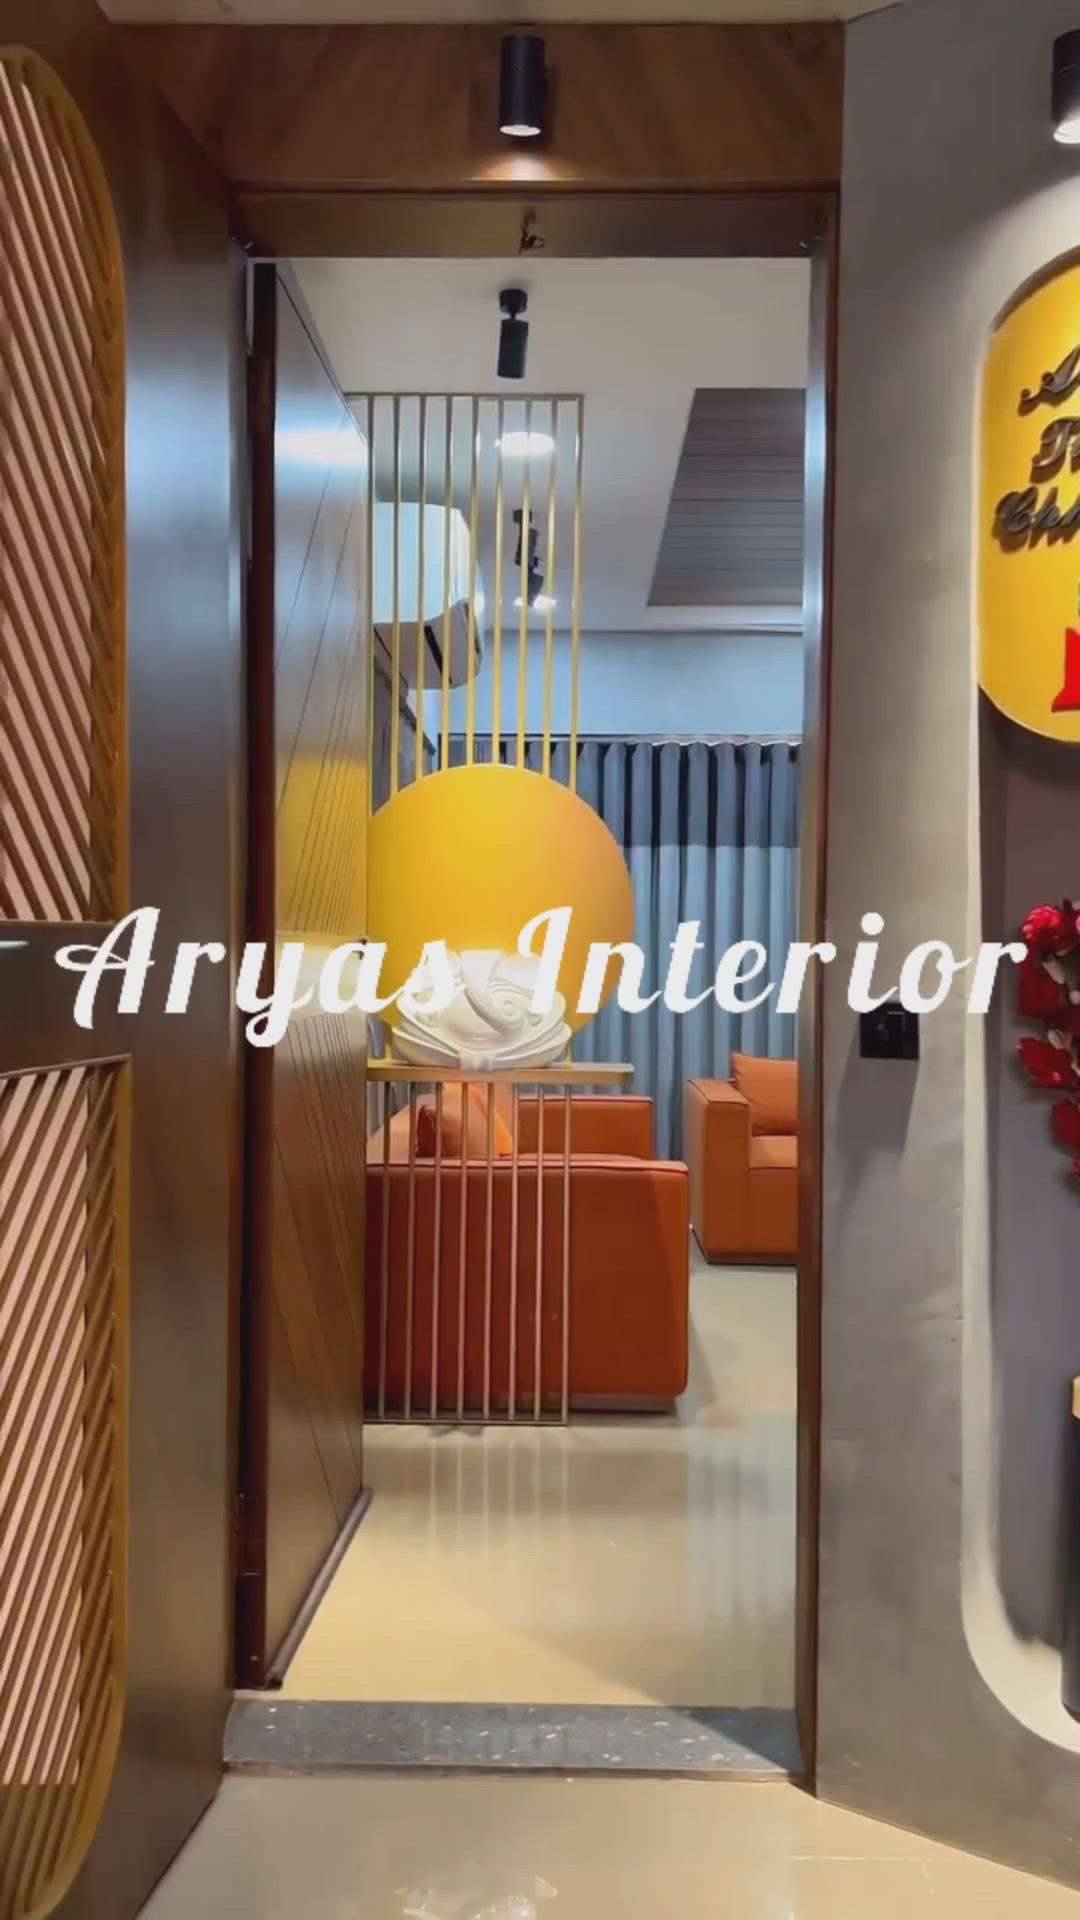 This festival season give your home a new look Ultra luxury flat interiors services by Design Interios a unit of Aryas interio & Infra Group,
Provide complete end to end Professional Construction & interior Services in Delhi Ncr, Gurugram, Ghaziabad, Noida, Greater Noida, Faridabad, chandigarh, Manali and Shimla. Contact us right now for any interior or renovation work, call us @ +91-7018188569 &
Visit our website at www.designinterios.com
Follow us on Instagram #aryasinterio and Facebook @aryasinterio .
#uttarpradesh #construction_himachal
#noidainterior #noida #delhincr #delhi #Delhihome  #noidaconstruction #interiordesign #interior #interiors #interiordesigner #interiordecor #interiorstyling #delhiinteriors #greaternoida #faridabad #ghaziabadinterior #ghaziabad  #chandigarh